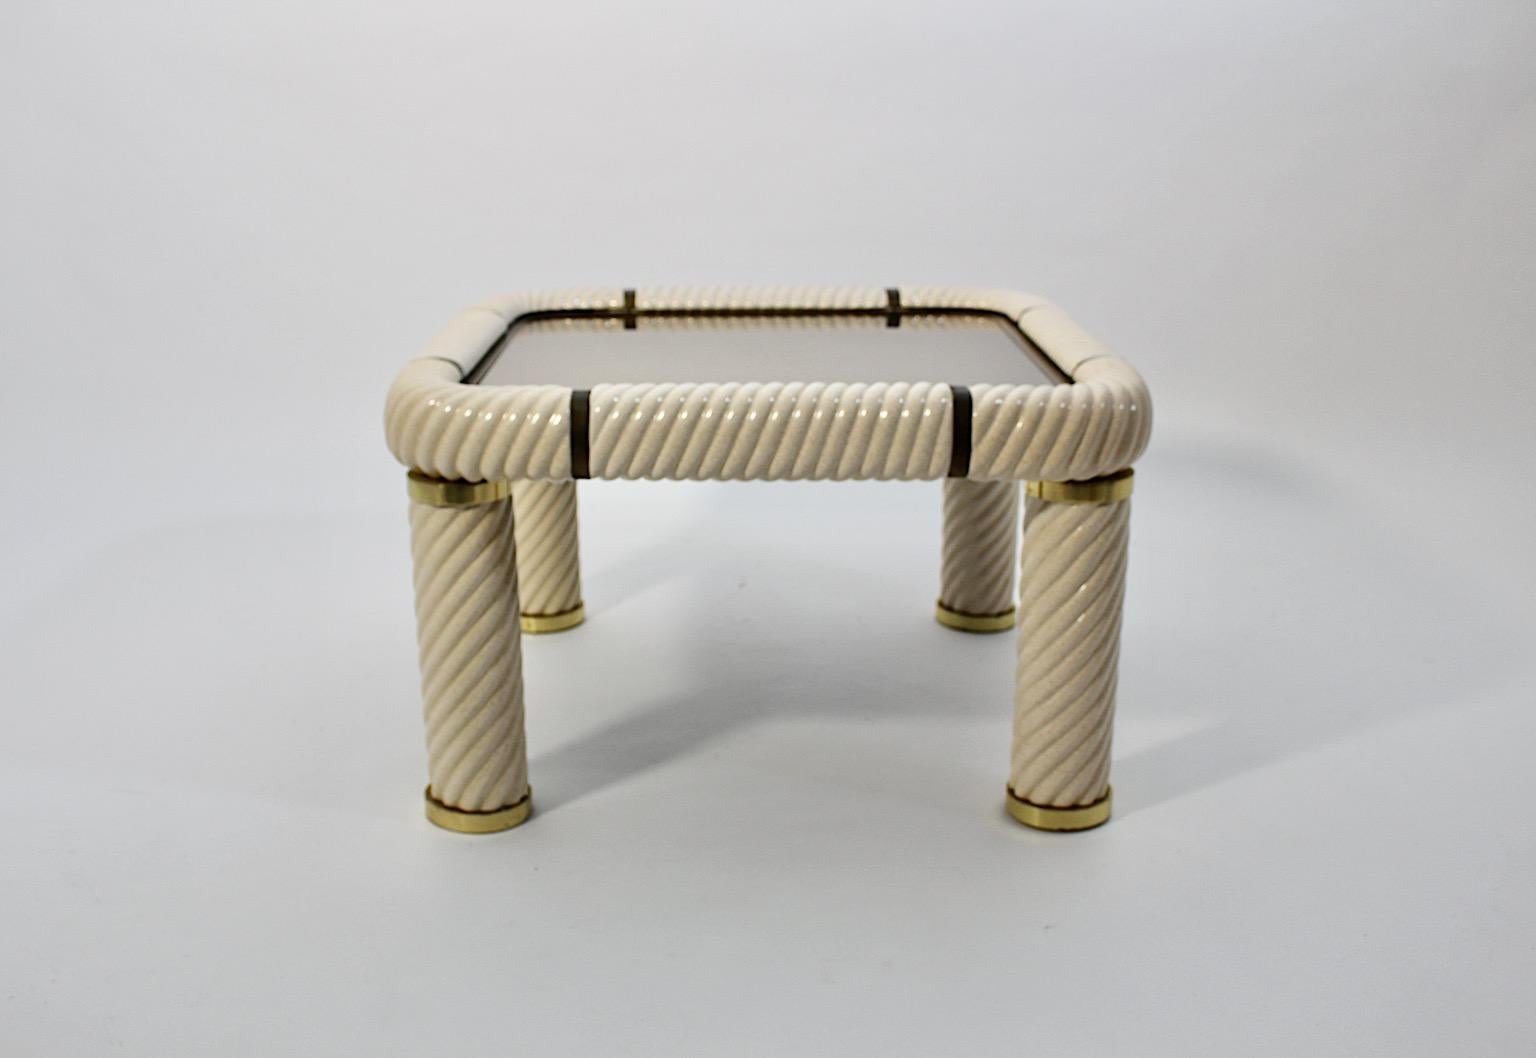 Hollywood Regency Style vintage coffee table by Tommaso Barbi from 
ivory colored ceramic, brass and mirrored metal 1970s Italy.
A stunning new arrival, the coffee table square like by Tommaso Barbi from cream white glazed curled ceramic frame,